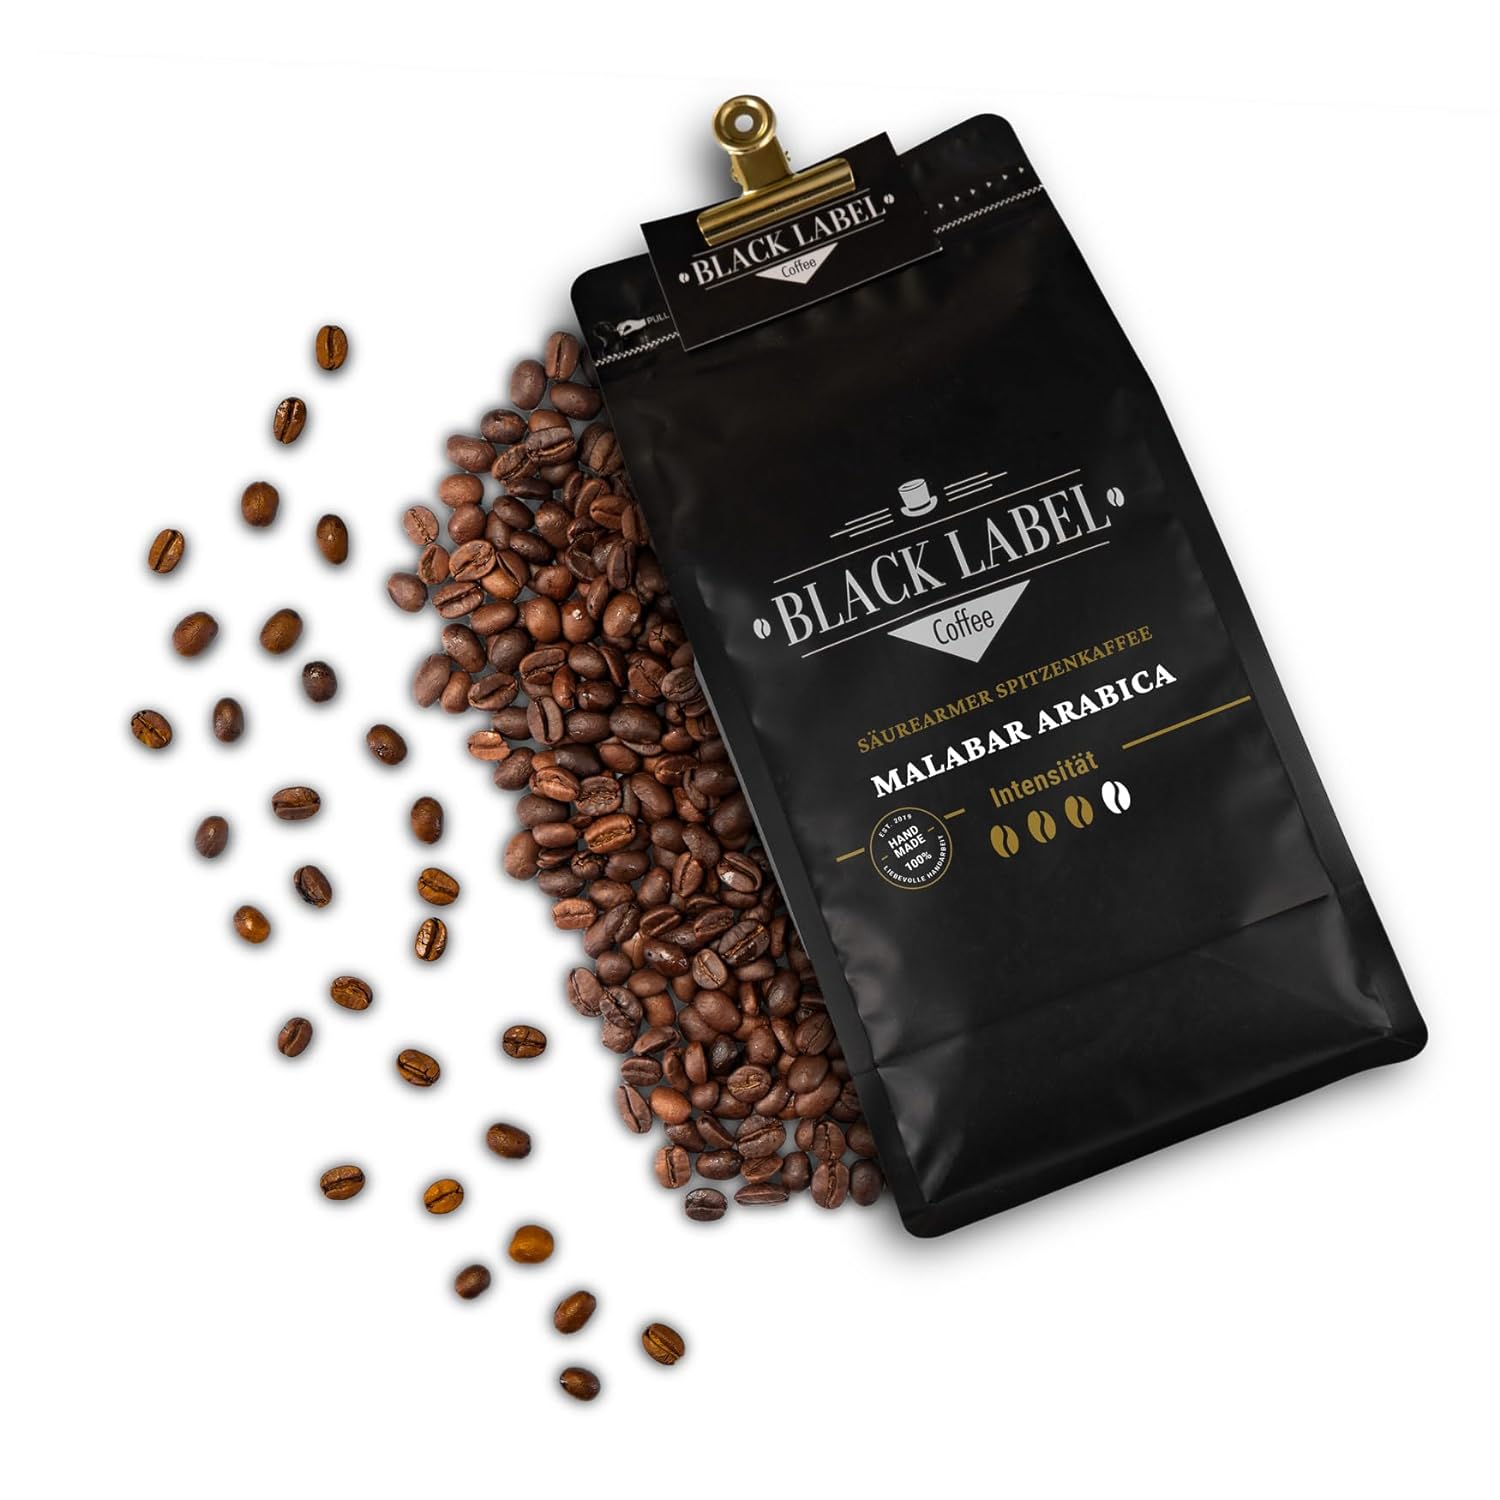 Black Label Coffee® Coffee Beans, 1 kg, Extremely Low Acid, Malabar Arabica, Chocolate, Rich Crema, Mild, Fresh & Slowly Roasted, Specialty Coffee, Whole Espresso for Fully Automatic and